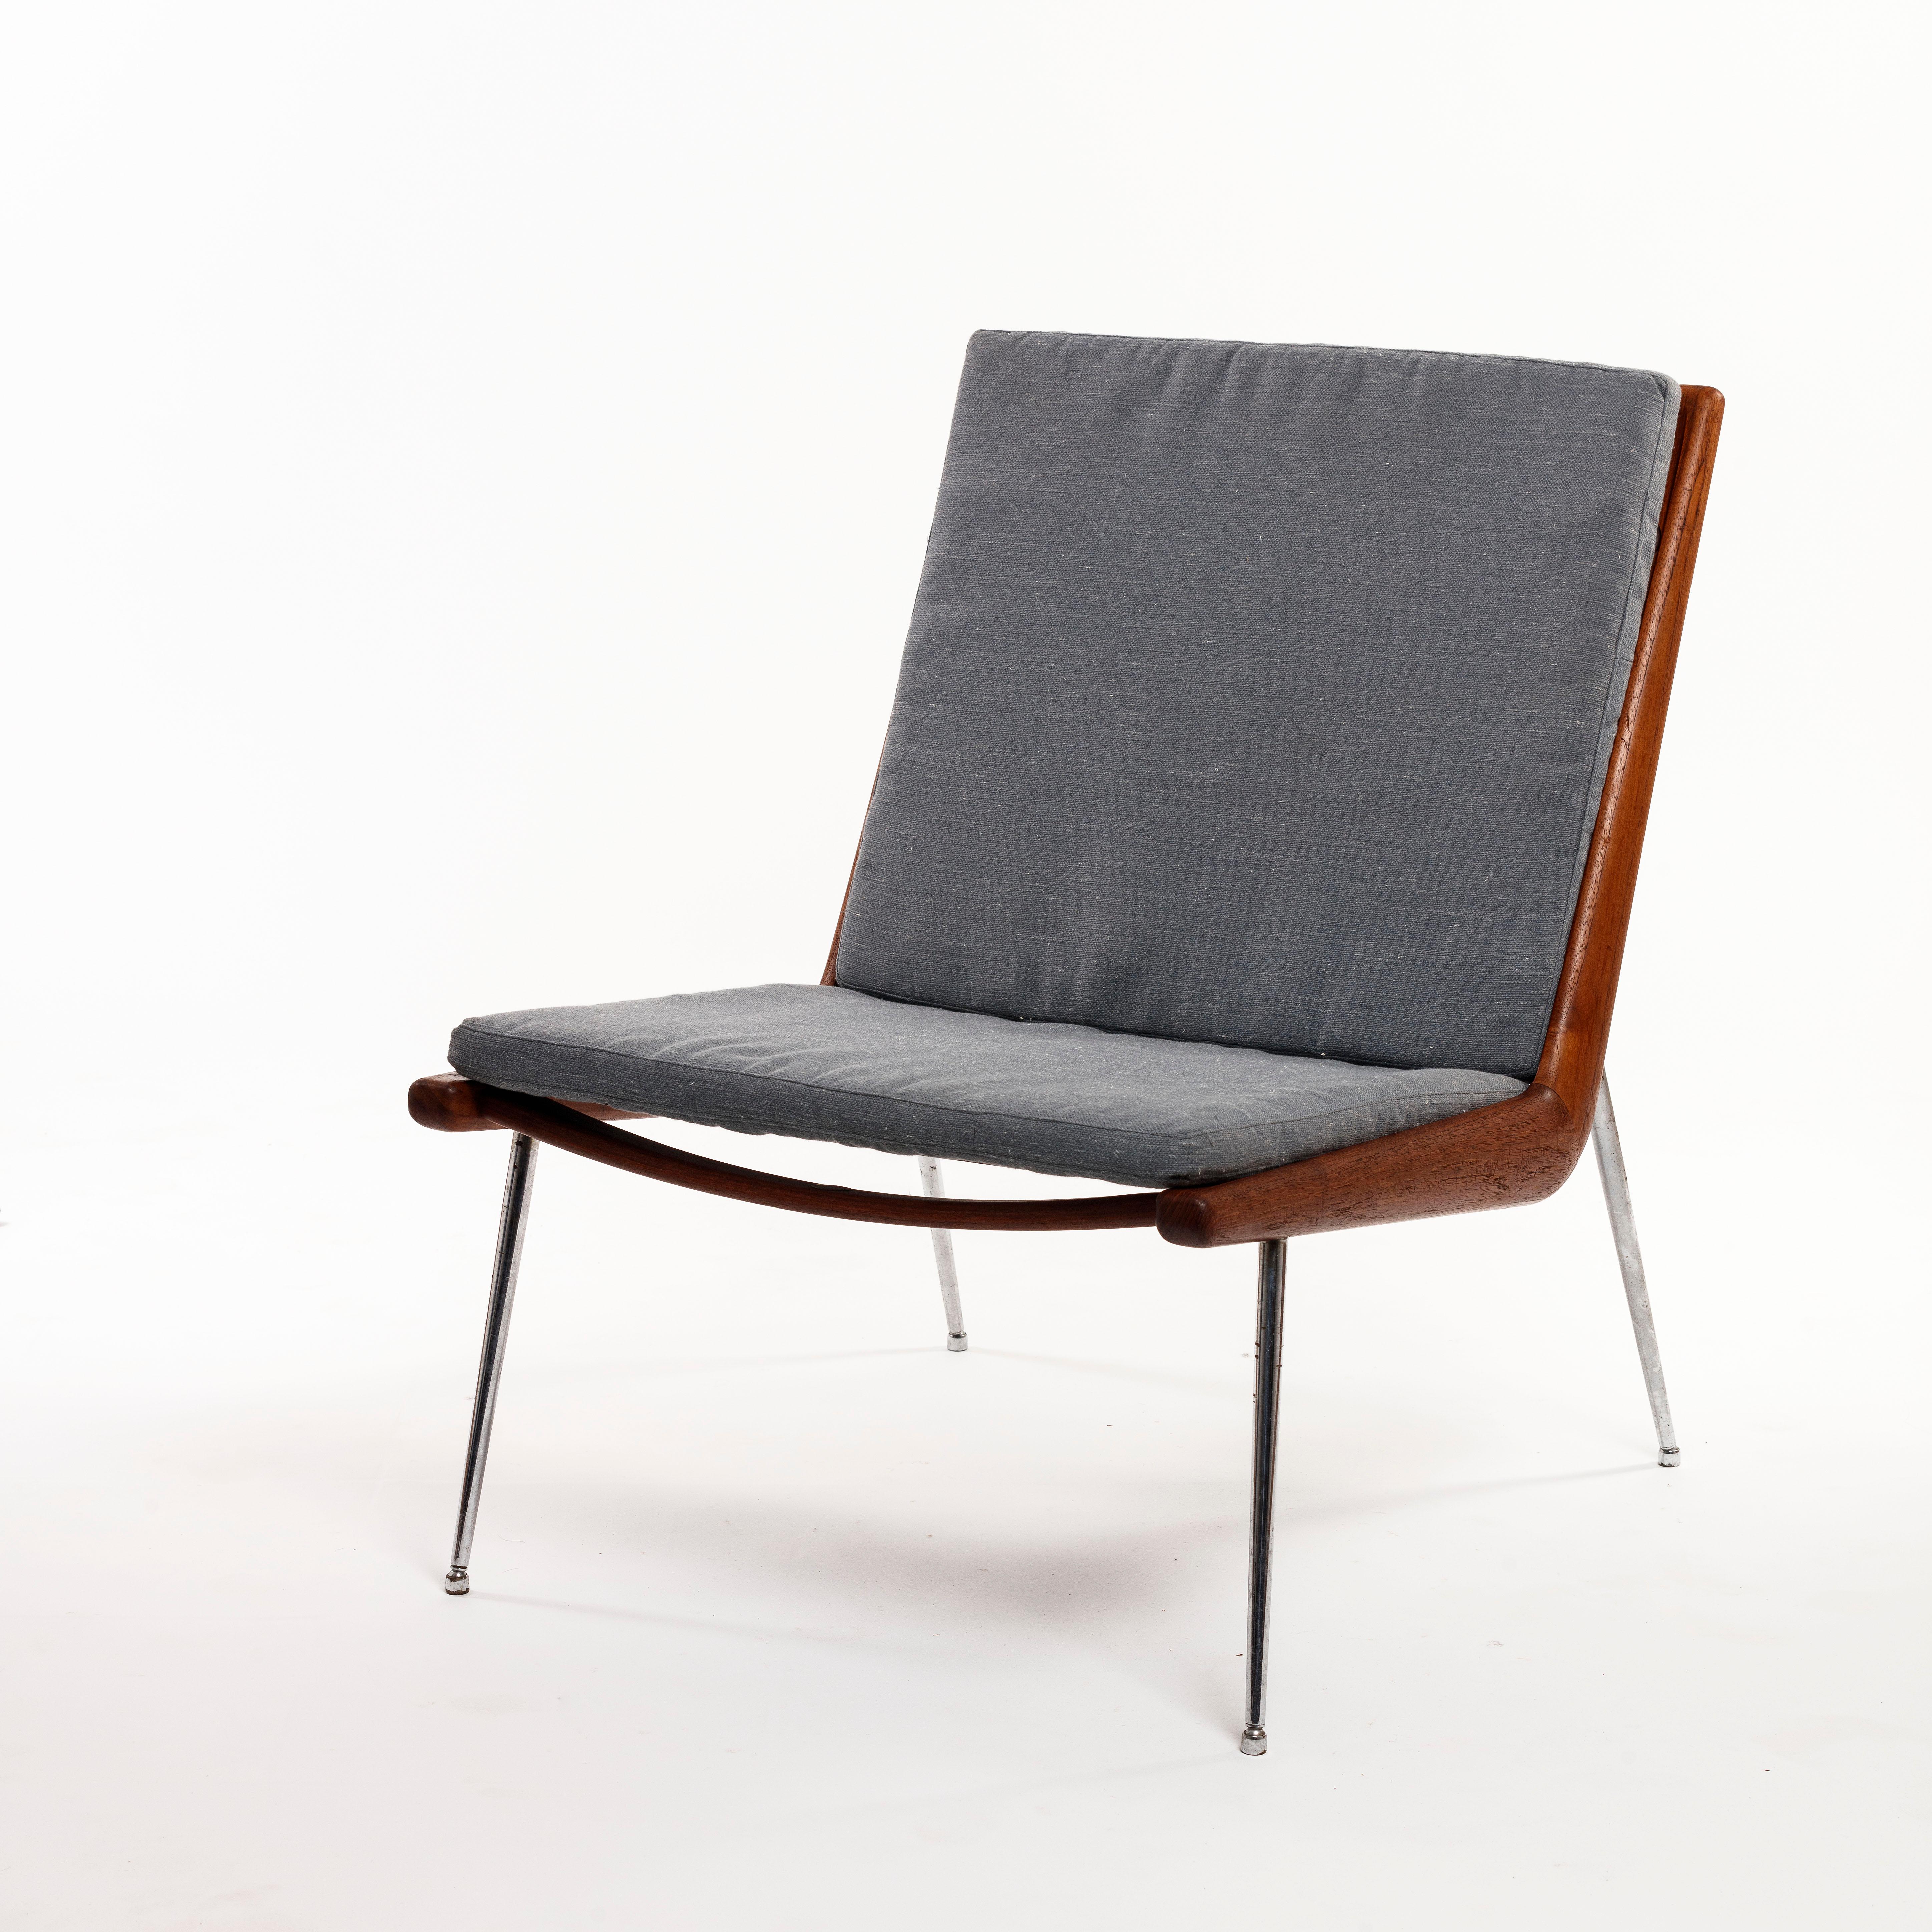 Designed by Peter Hvidt (1916-1986) and Orla Mølgaard Nielsen (1907-1993) were Danish architects and furniture designers, true pioneers of Danish mid-century design and the founders of Copenhagen-based firm Hvidt & Mølgaard.
Among their production,